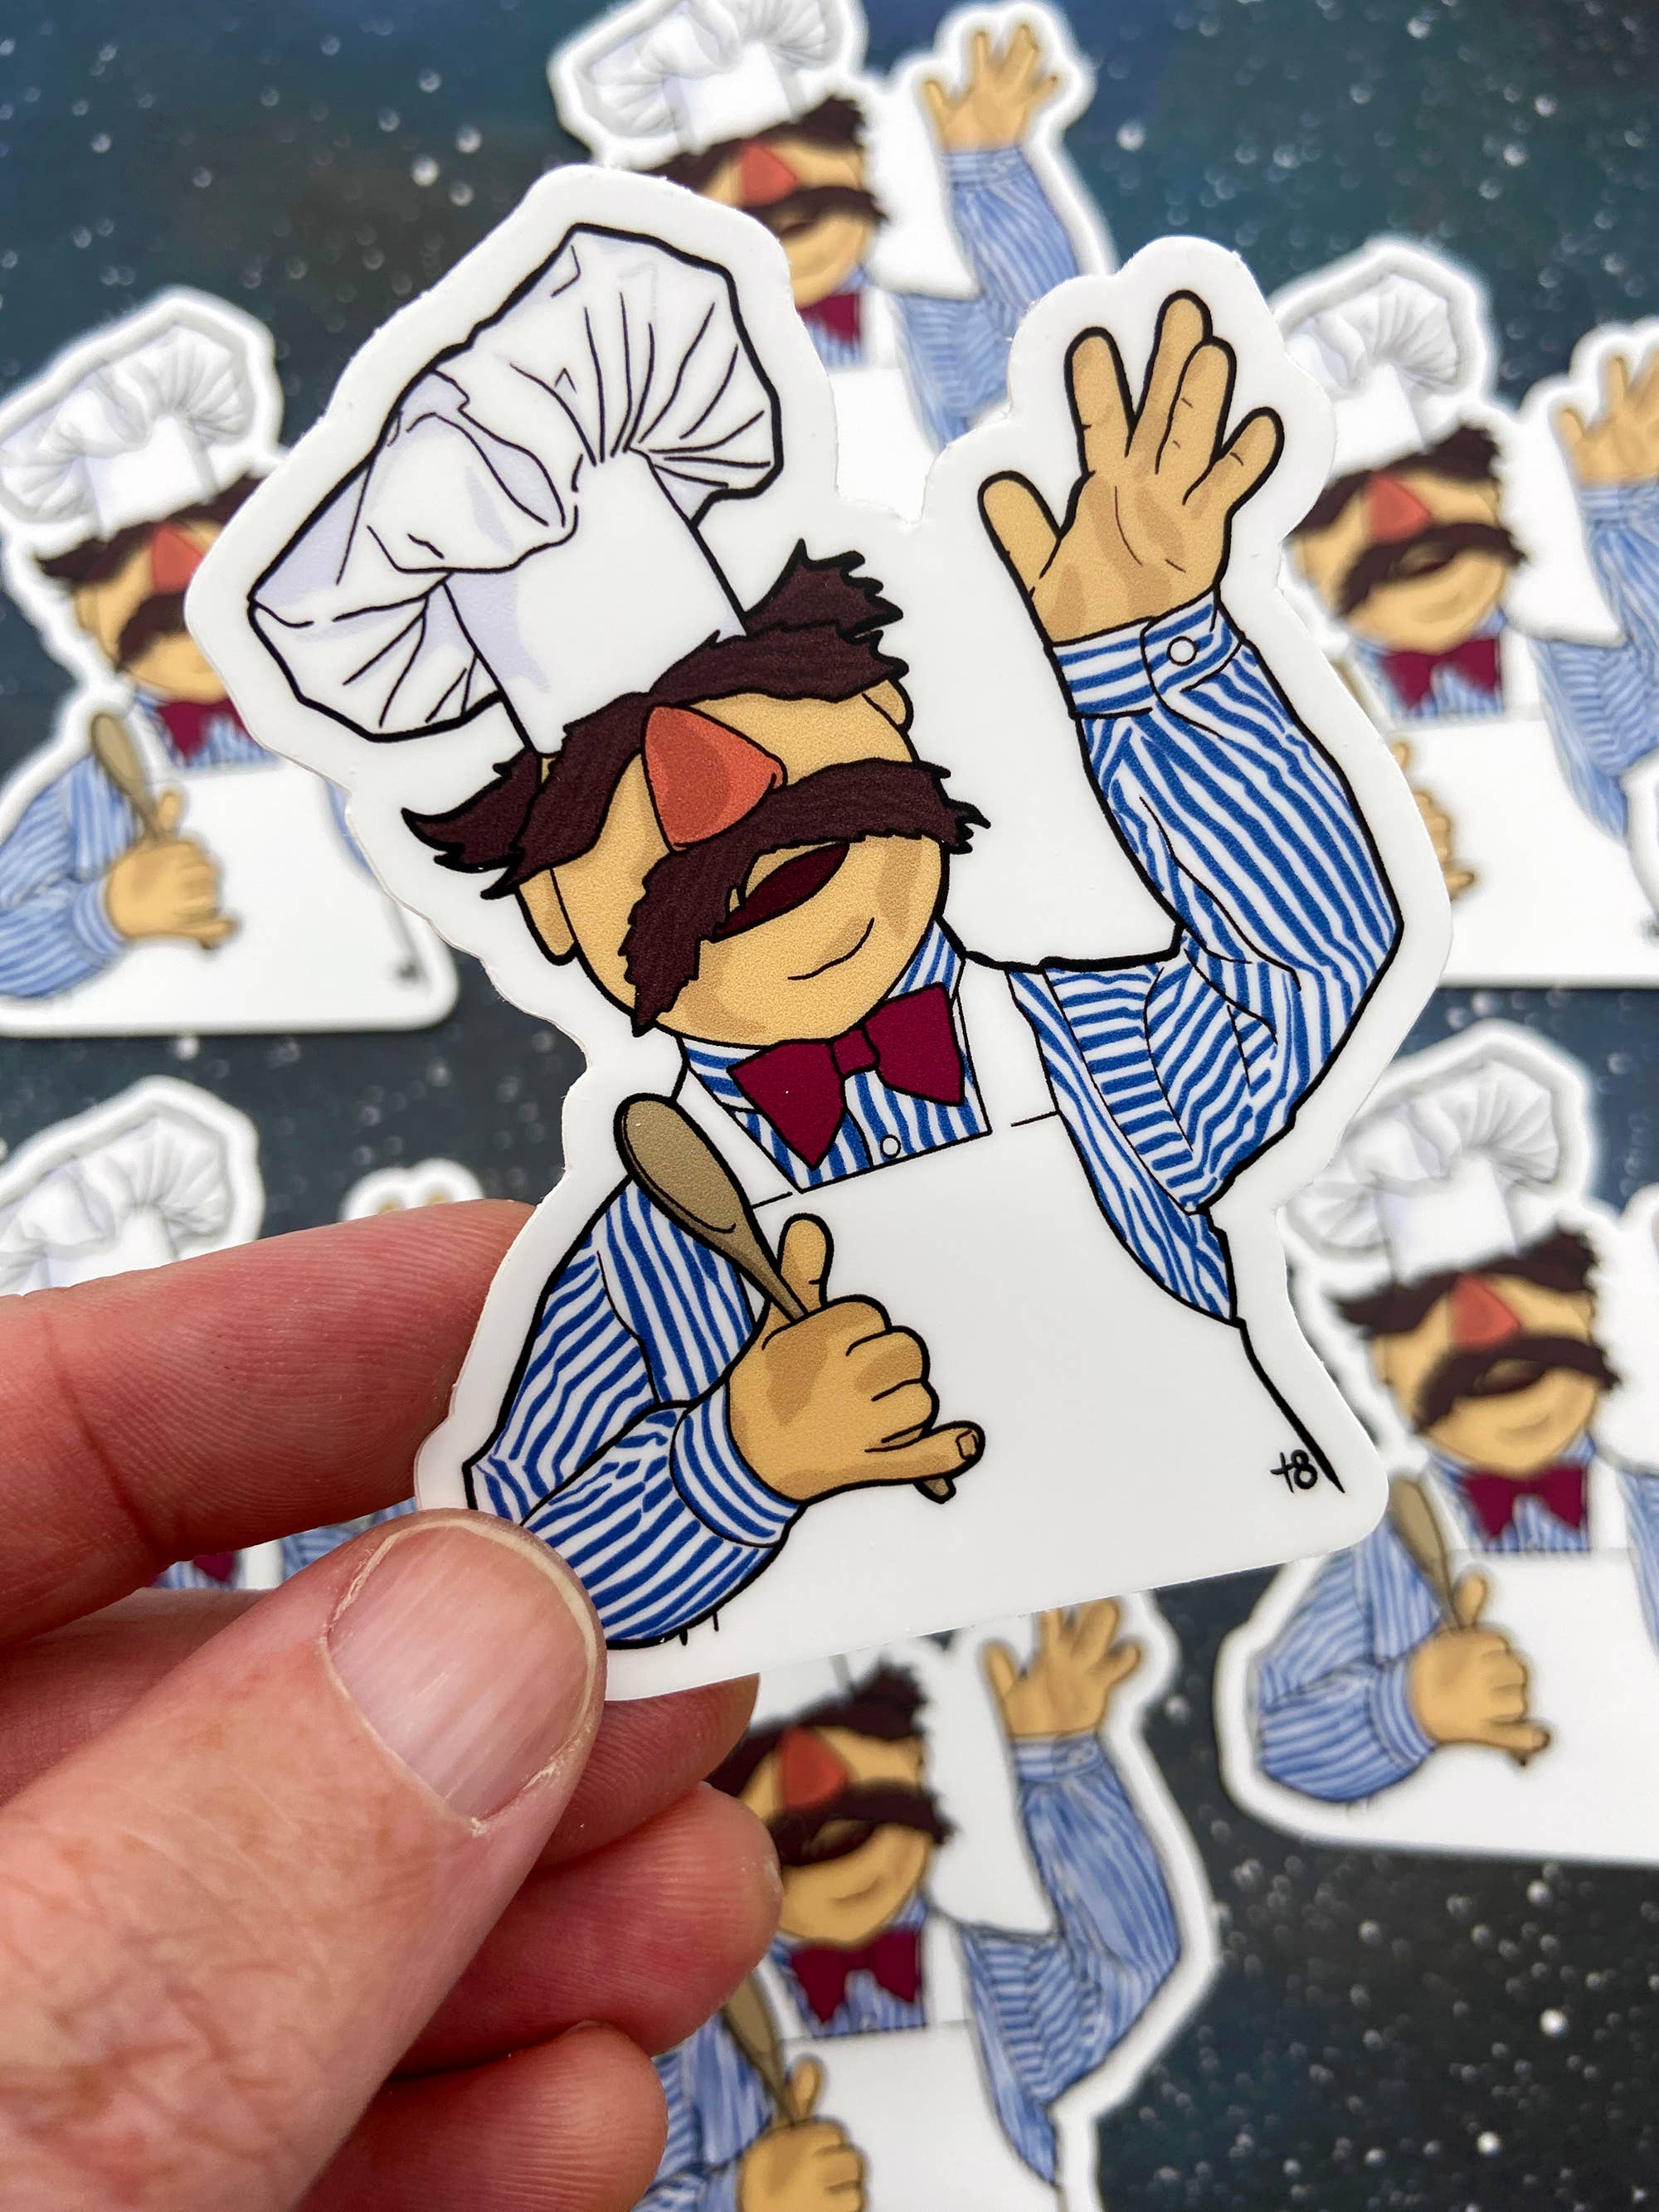 Vinyl Decal - Swedish Chef The Muppets